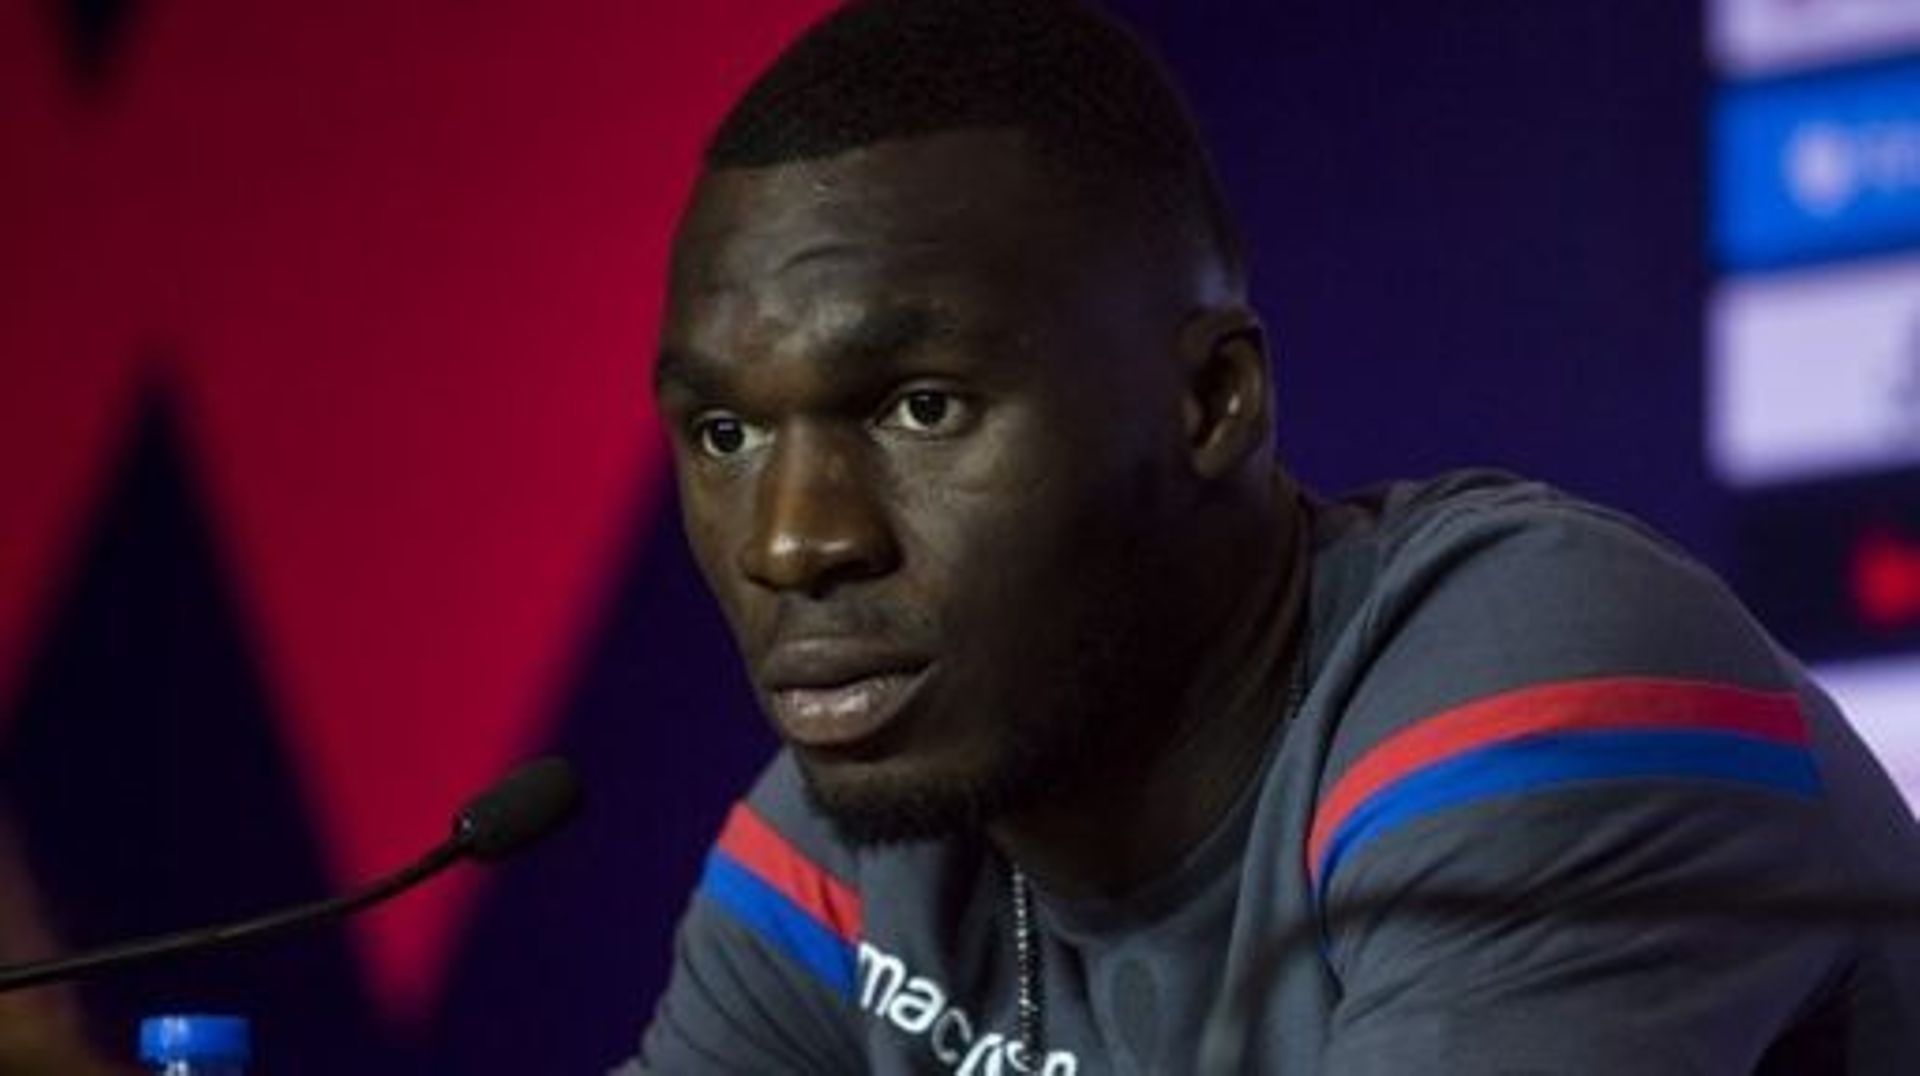 Crystal Palace player Christian Benteke speaks during a press conference of the Premier League Asia Trophy football tournament in Hong Kong on July 21, 2017. ISAAC LAWRENCE / AFP